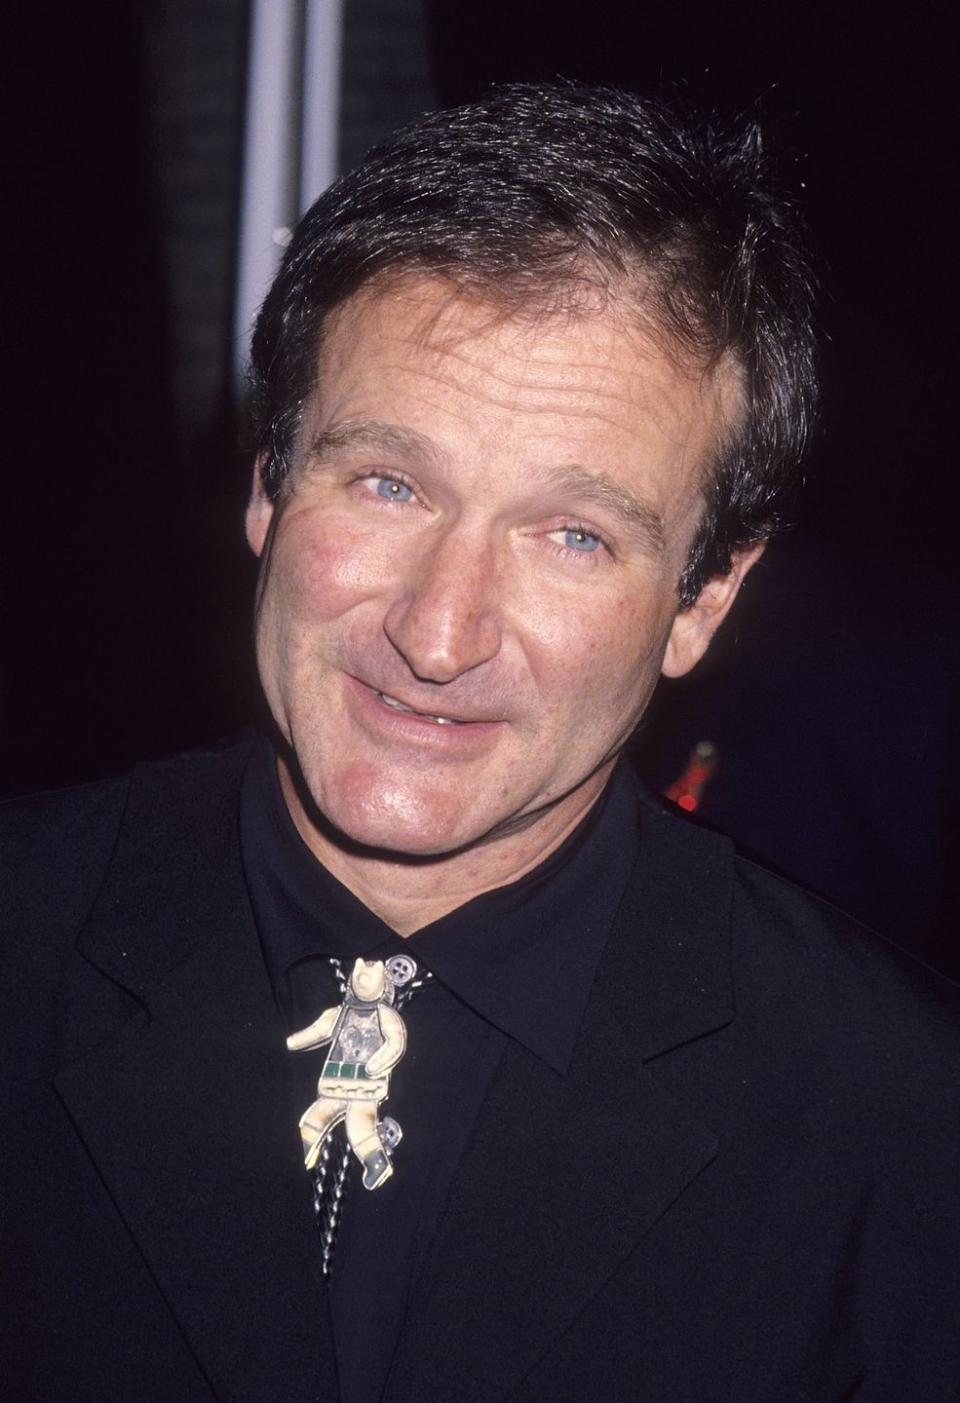 <p>Robin Williams' role in <em>Mrs. Doubtfire</em> made us laugh, cry, and became an instant classic. For that, we proudly name the late Robin Williams 1993's leading man. </p>